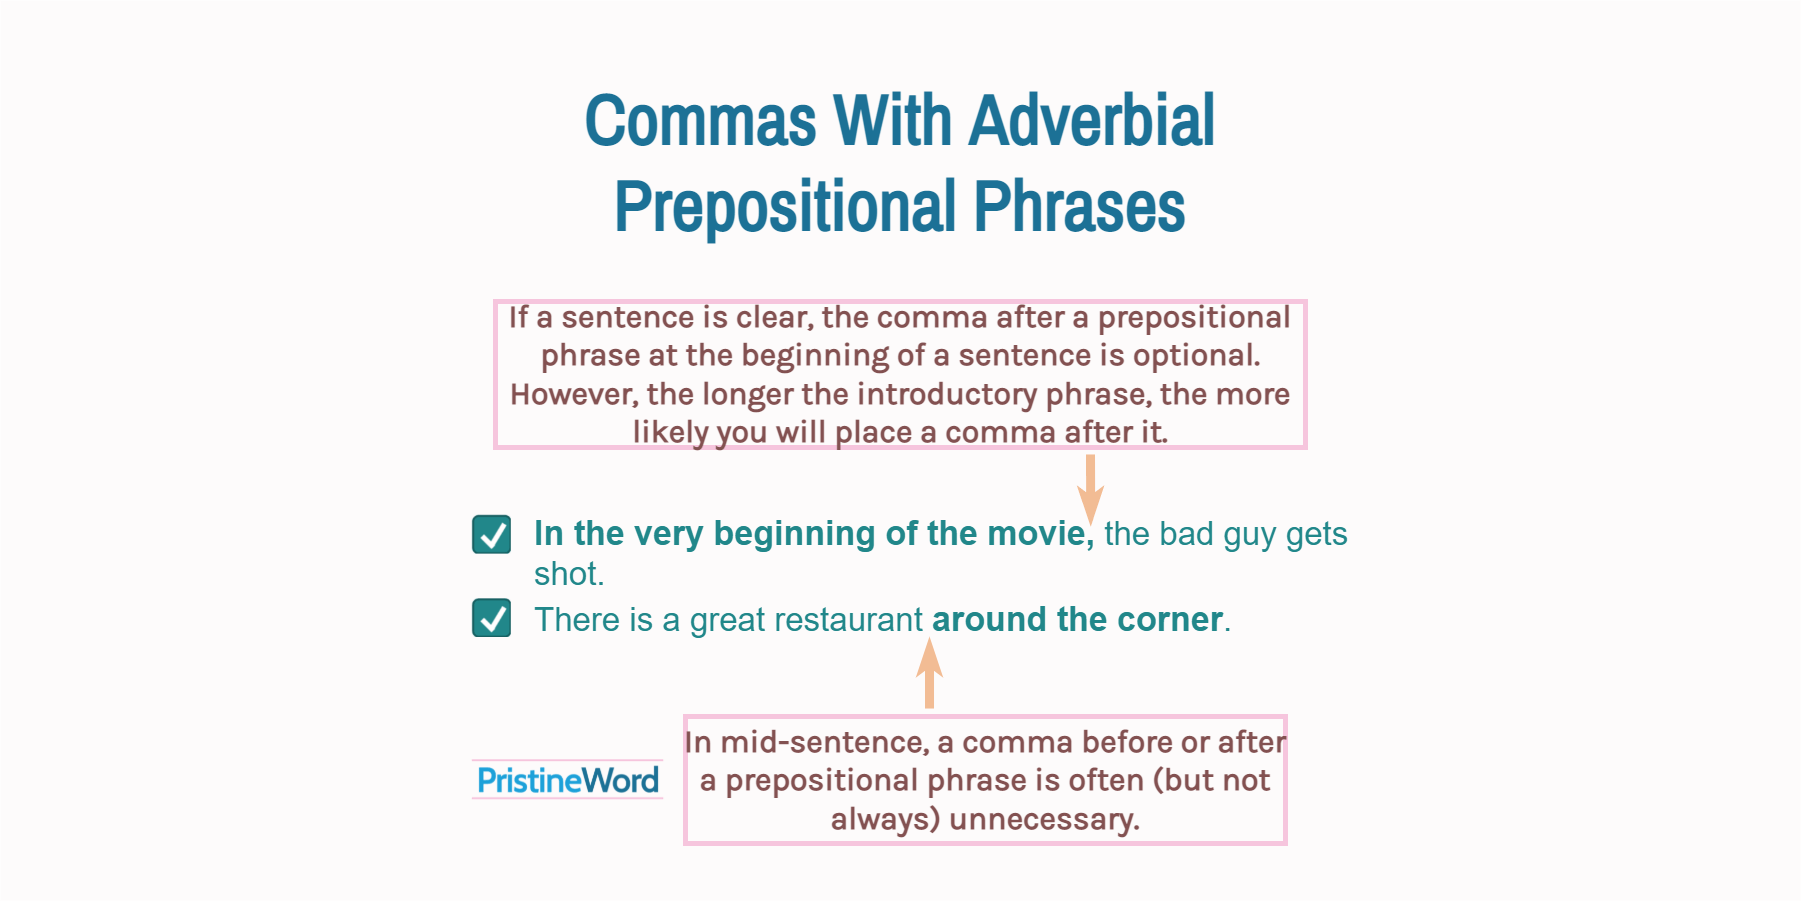 Commas With Adverbial Prepositional Phrases